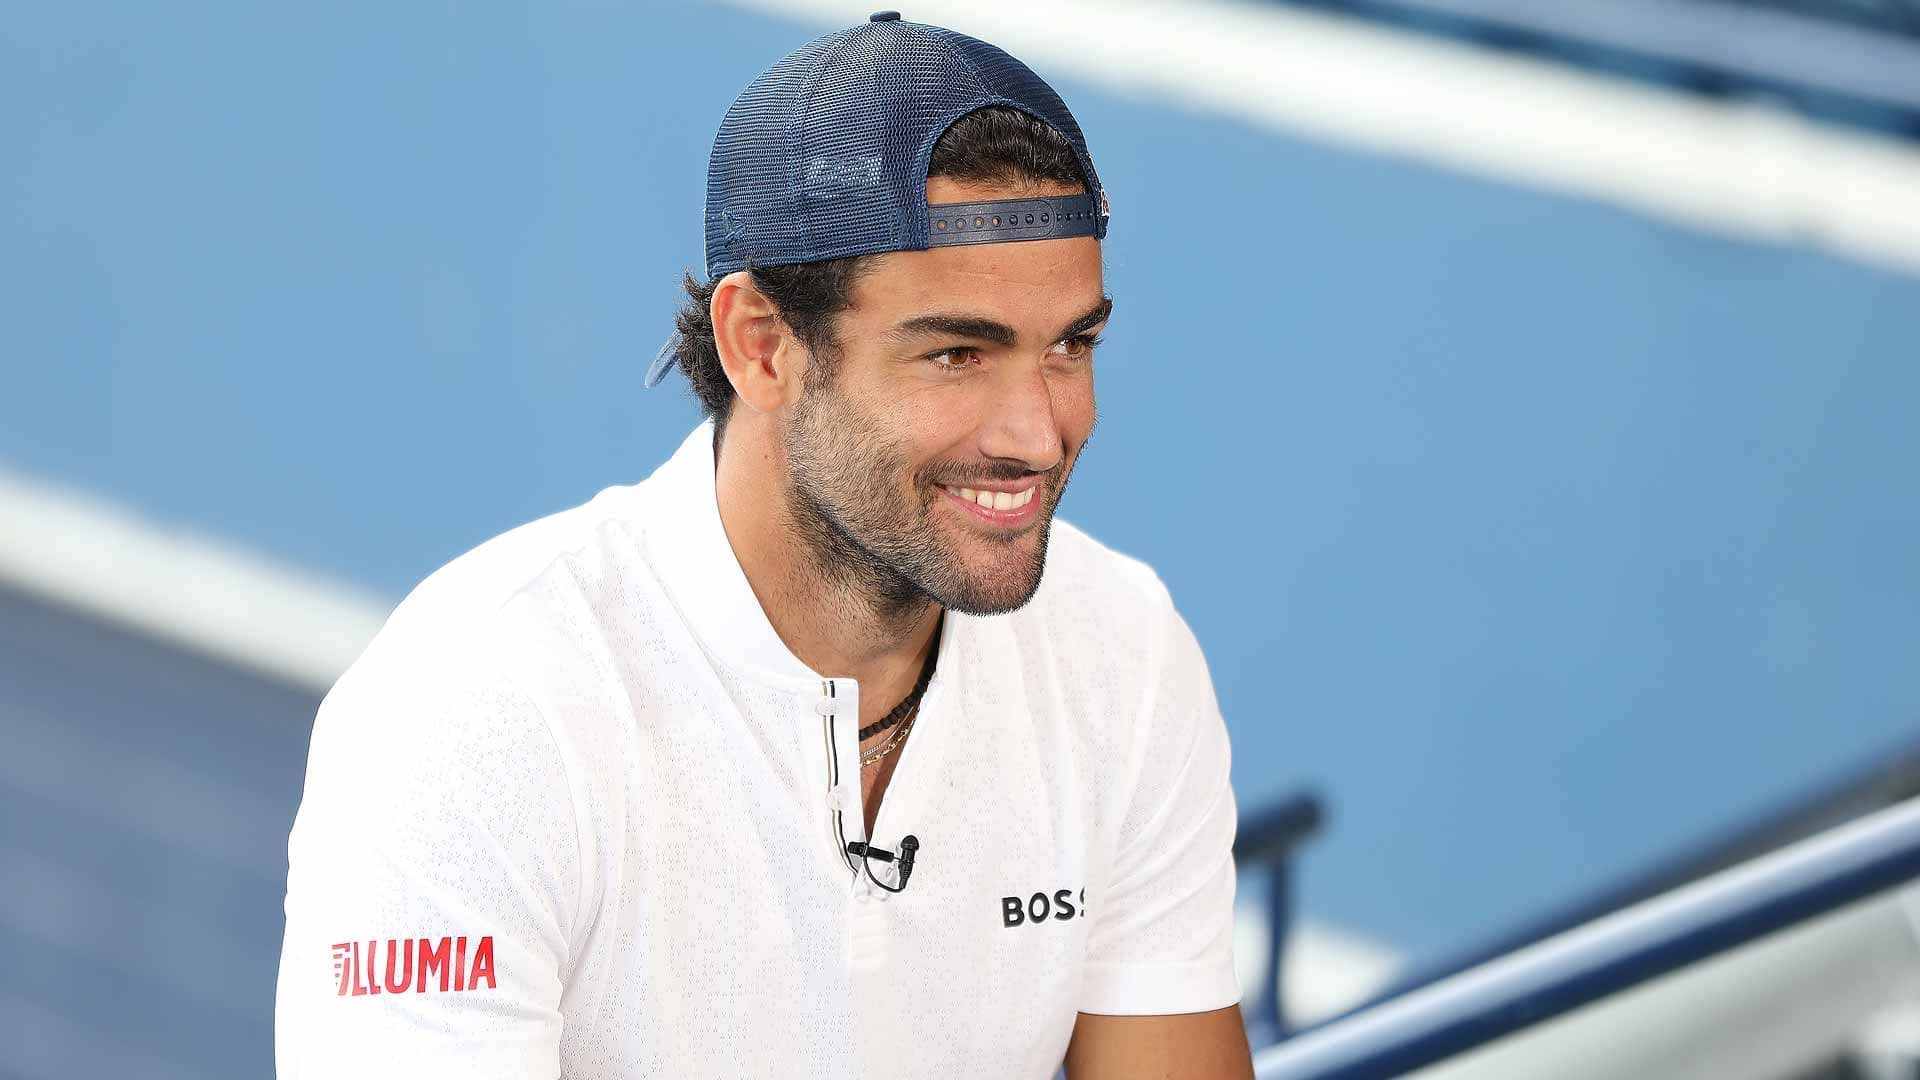 Matteo Berrettini is competing in Toronto for the first time.